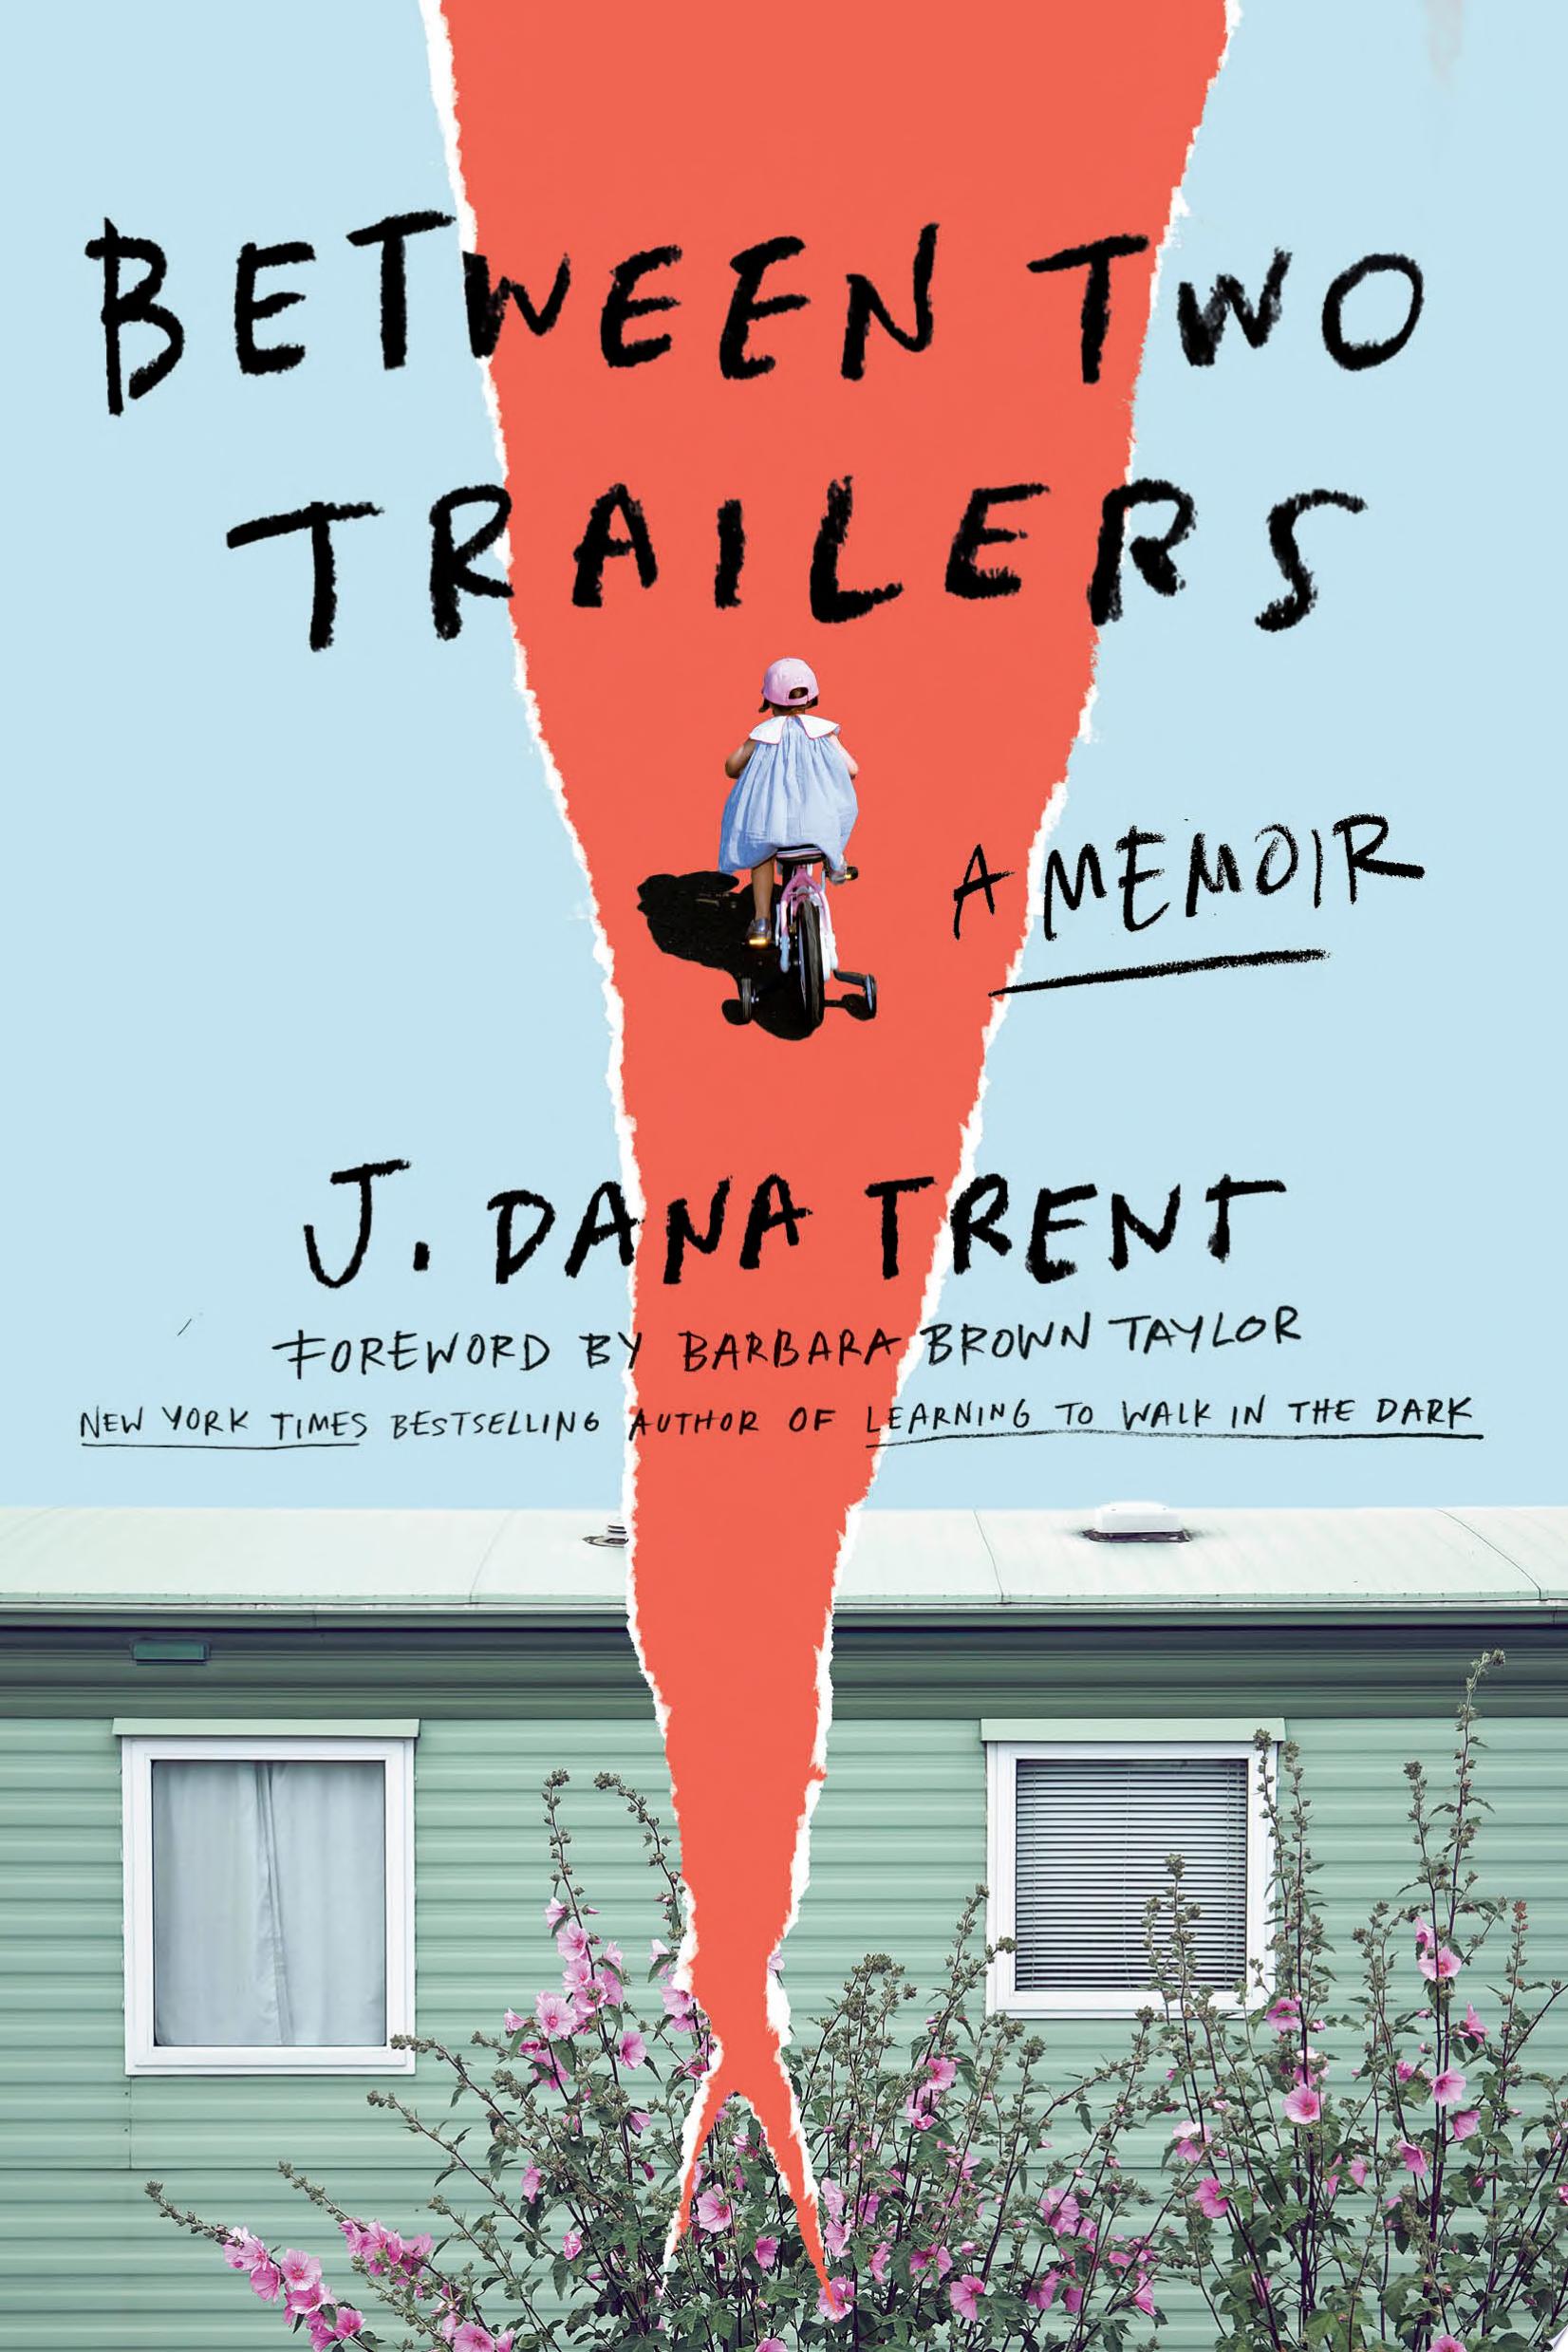 Image for "Between Two Trailers"